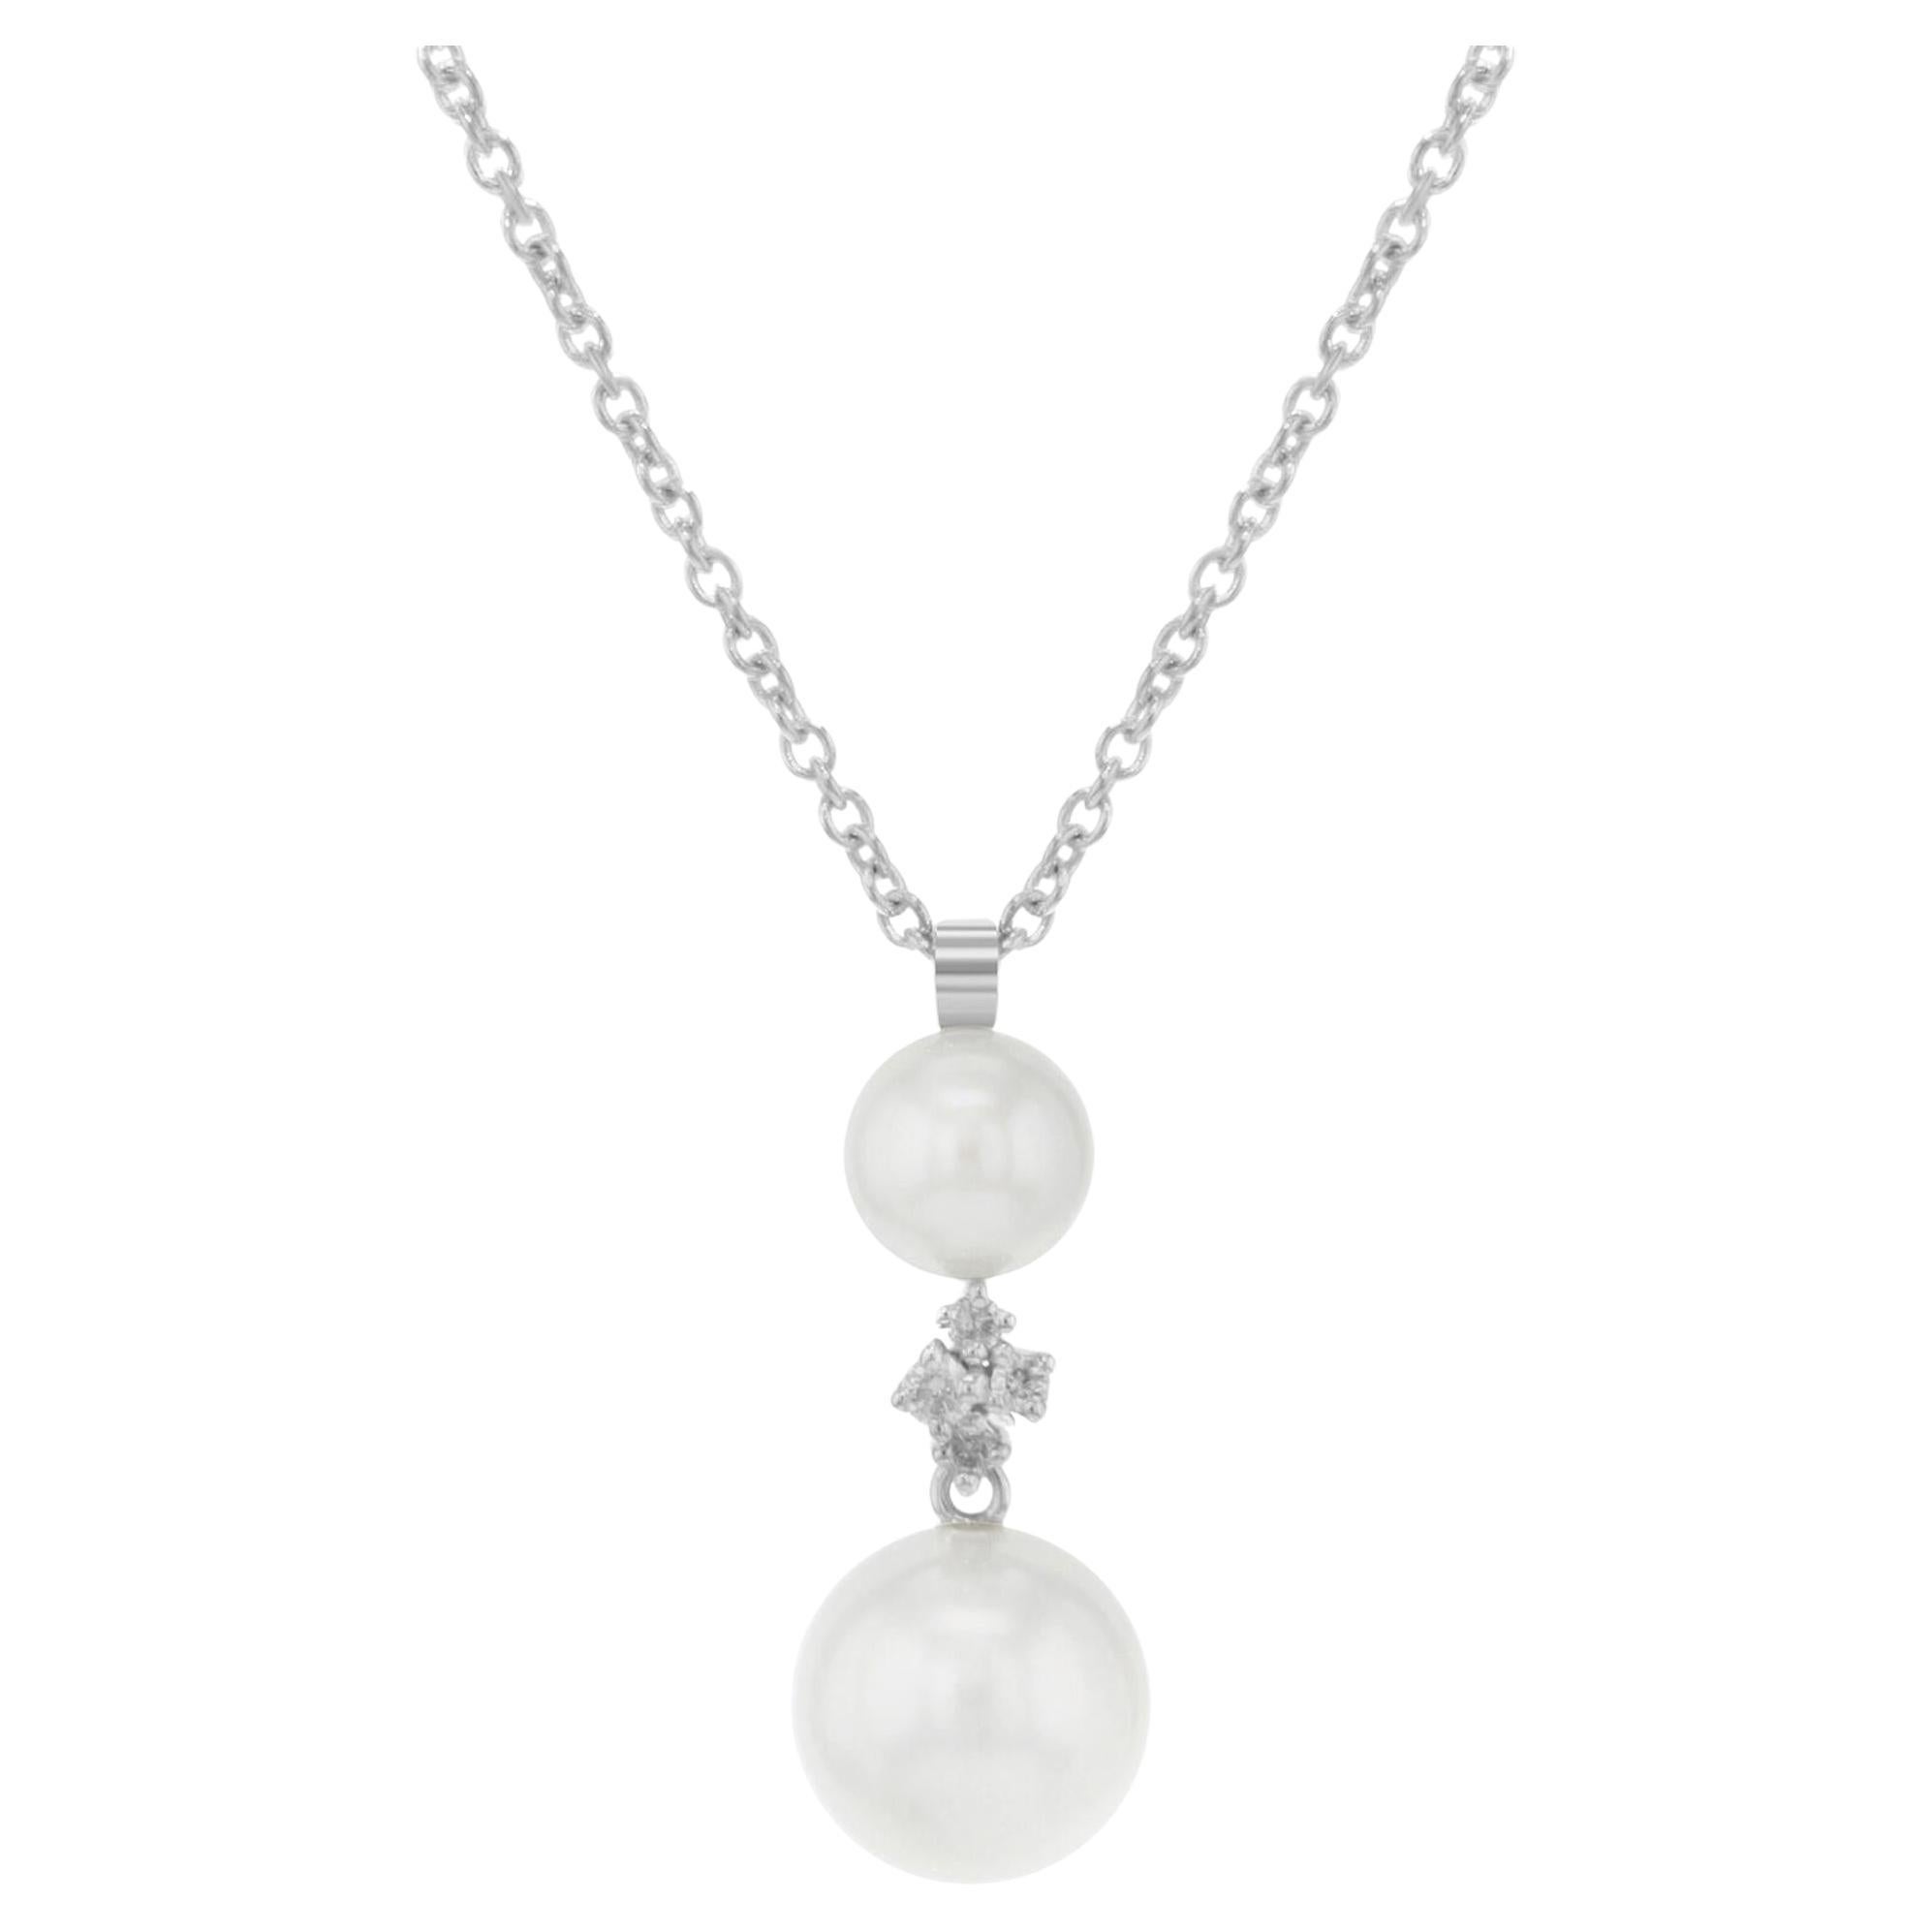 Bliss by Damiani Ribes Ext. Pearl Diamond Pendant Necklace 18k White Gold 0.04Ct